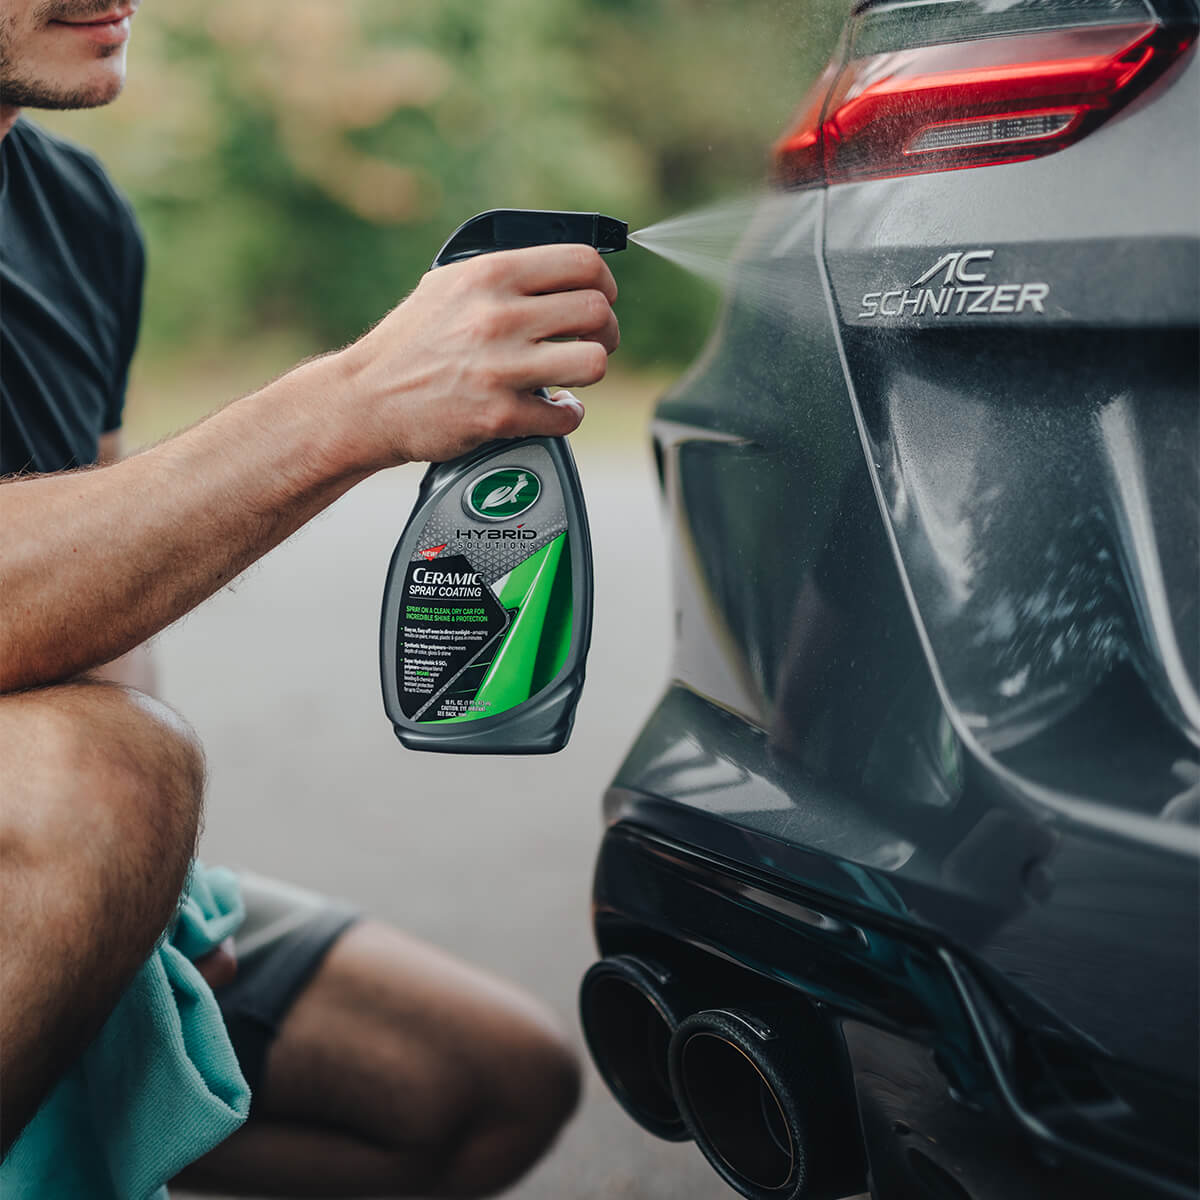 Turtle Wax Hybrid Solution Ceramic Spray Coating  Easy on, easy off. ✓ Can  be applied in direct sunlight. ✓ Ceramic protection & shine. ✓ Incredible  water repellency. ✓ Turtle Wax Ceramic